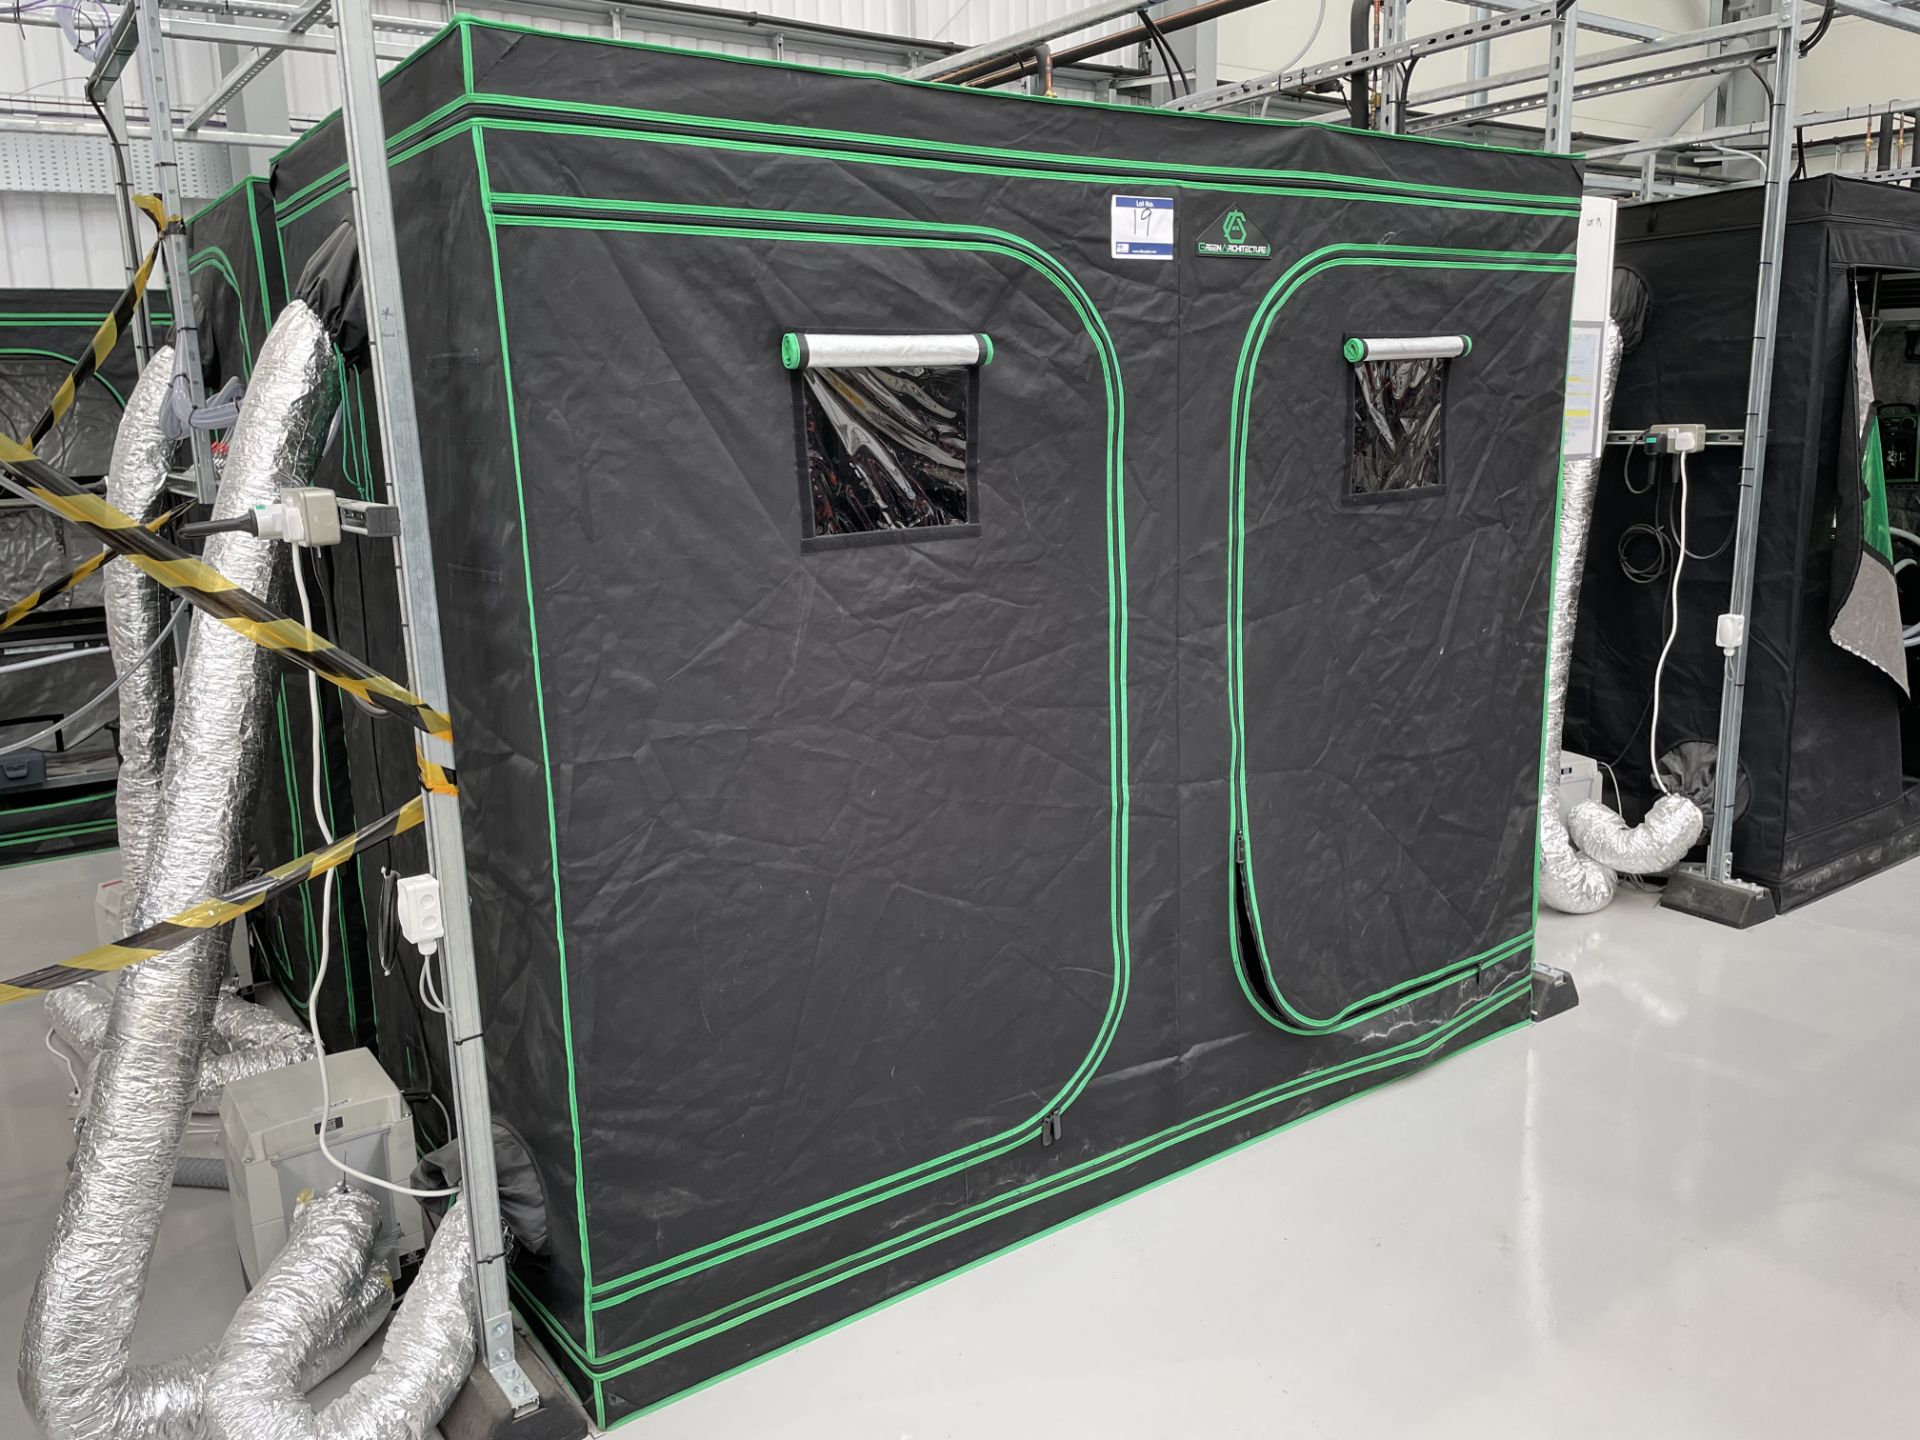 2.4 x 1.2 x 2M Horticultural / Hydroponic Growing Tent Including: Eider Controls Dehumidifier and Da